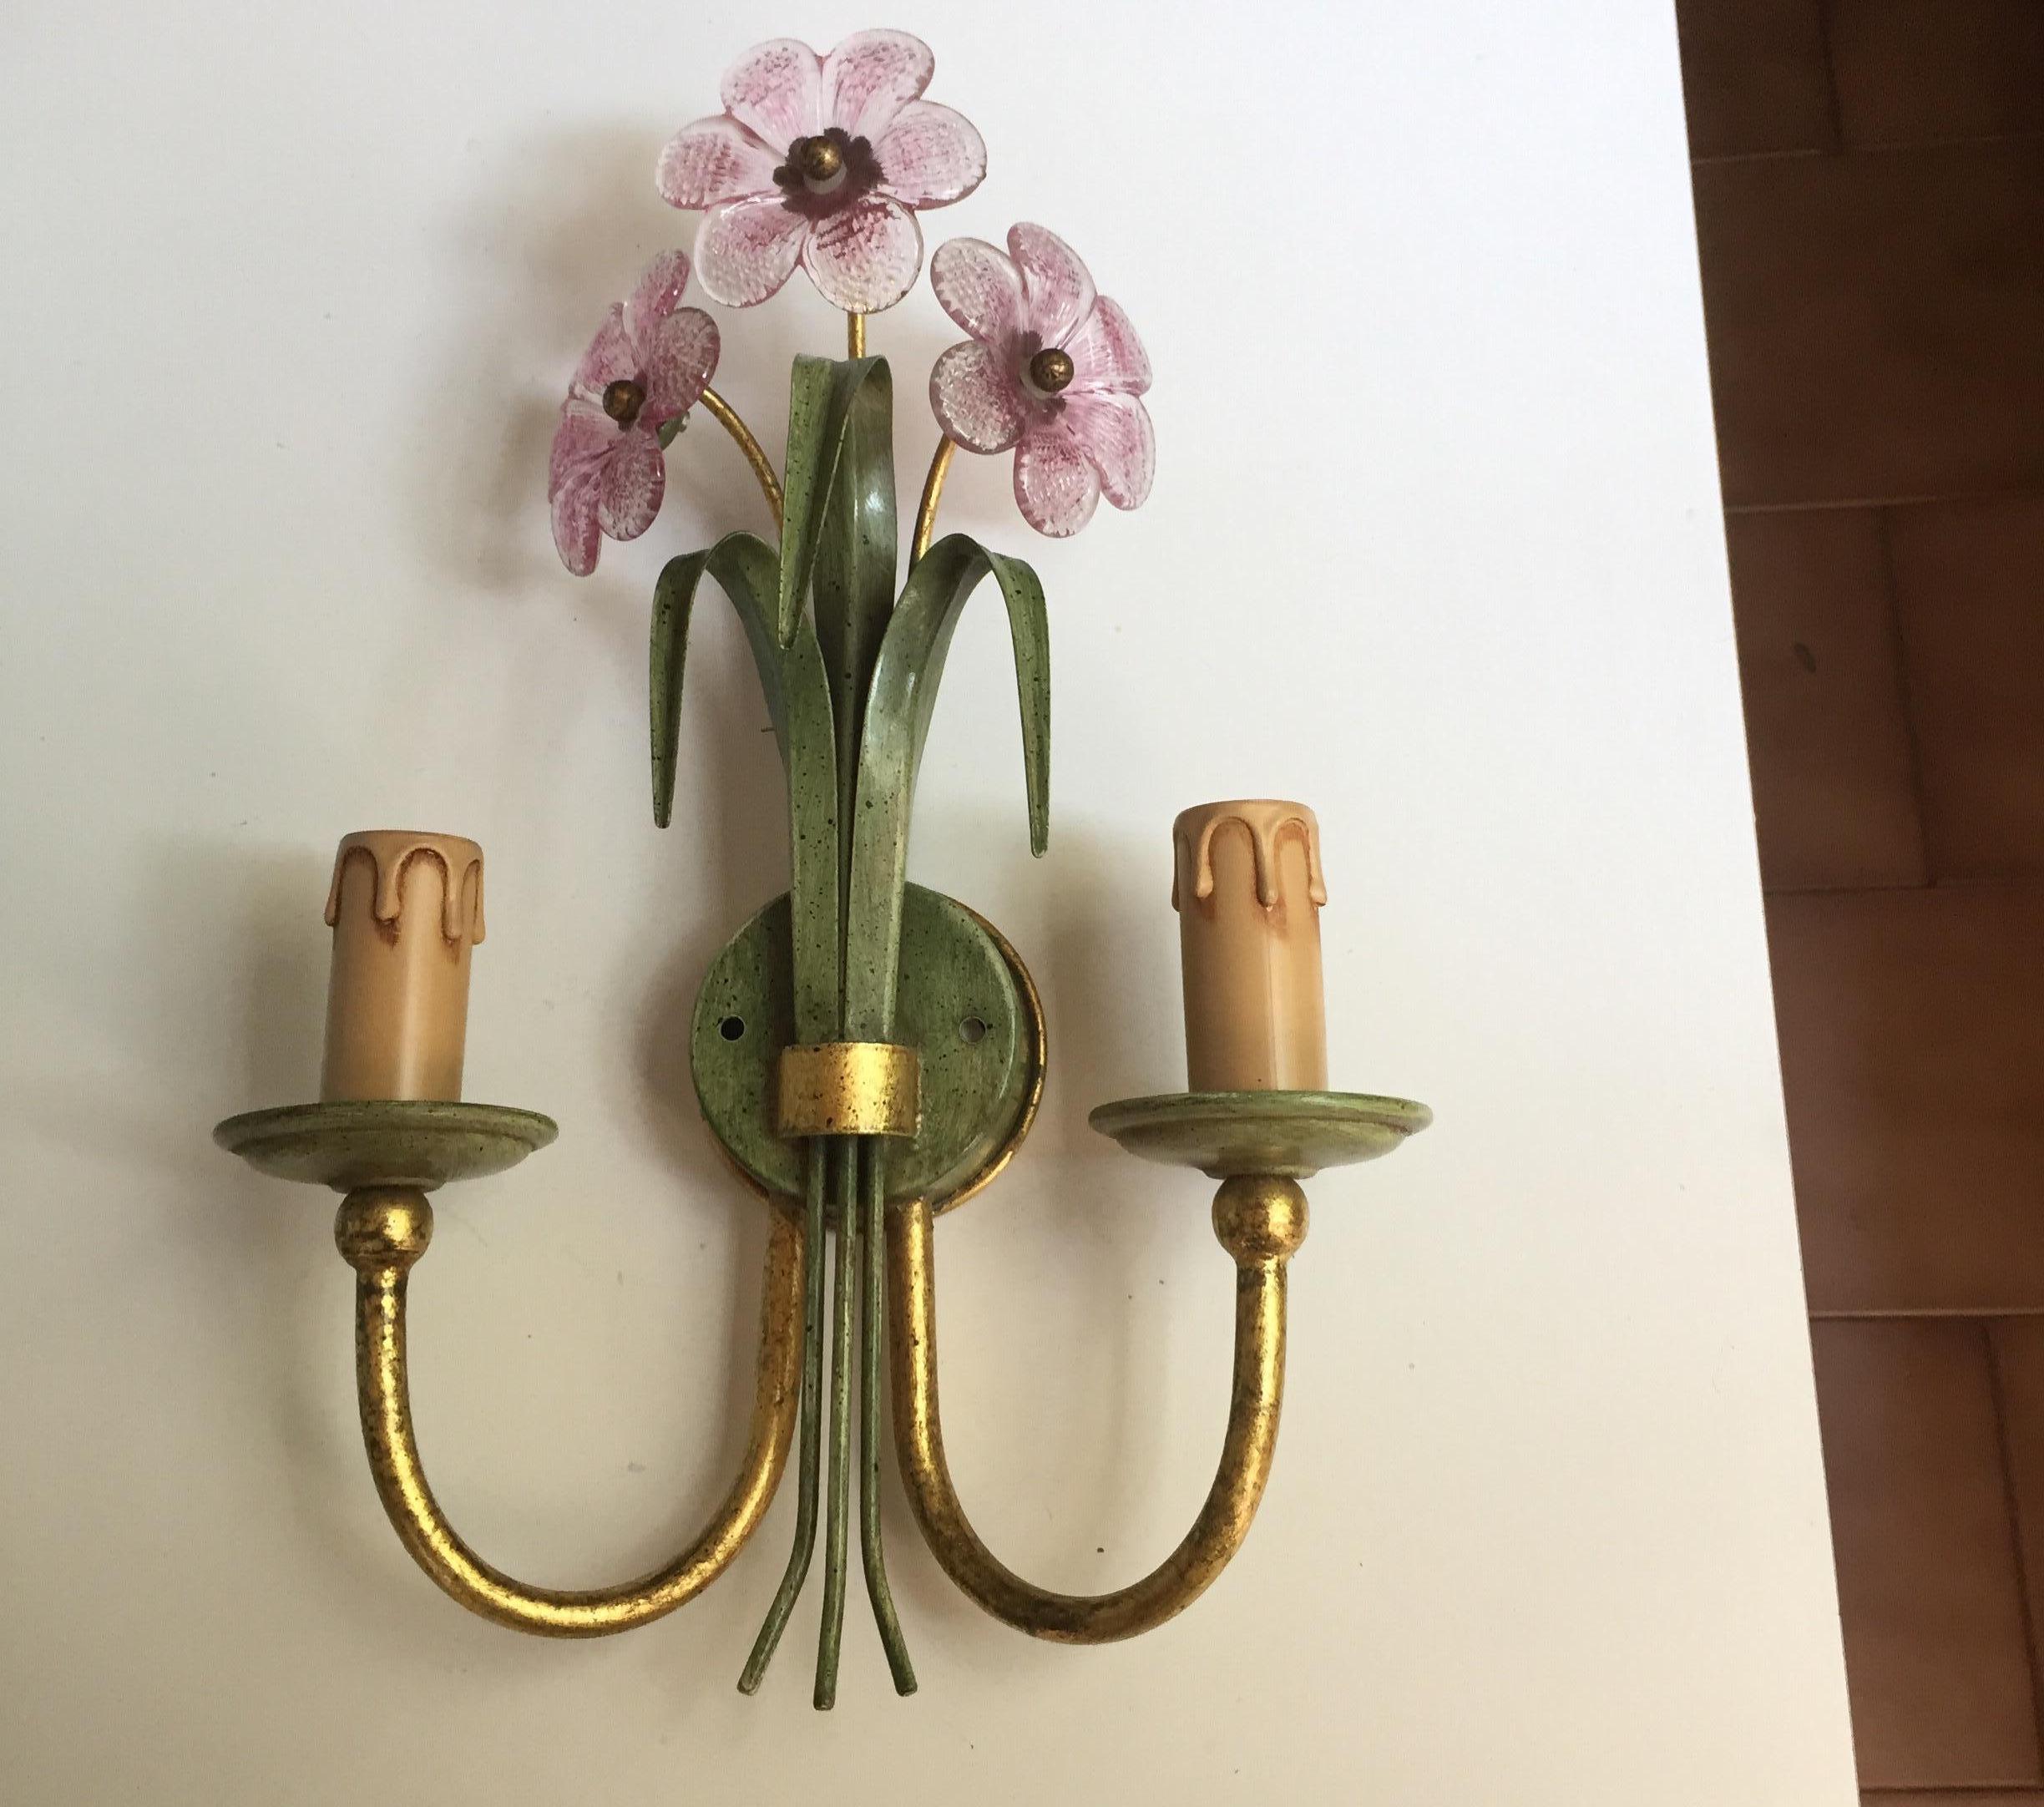 Vintage pair of Italian iron sconces, two green painted and partially gilt two-light sconces by Banci, manufactured by Banci Firenze, decorated with pink crystal flowers. 
These lovely original Italian iron wall-lights are realized with a gilded and